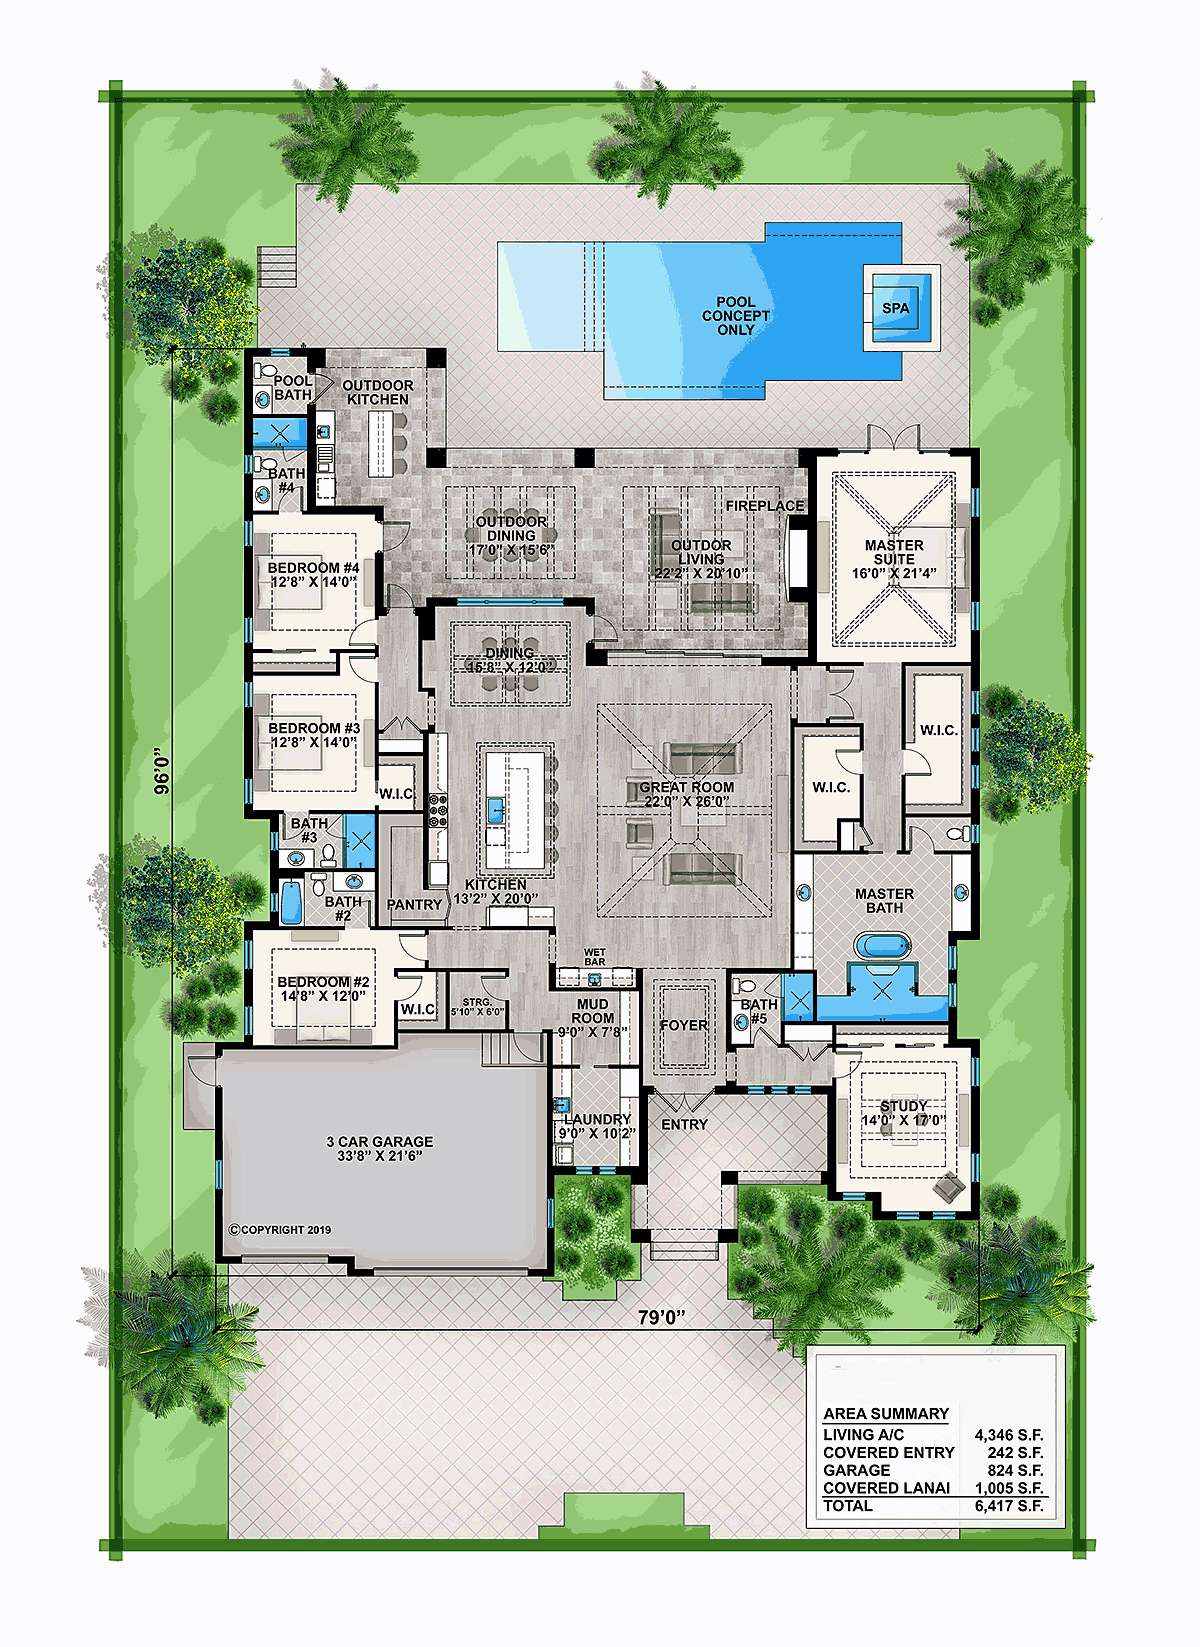 House Plan 52961 Florida Style With 4346 Sq Ft 5 Bed 5 Bath 1 Half Bath,Brown Neutral Living Room Wall Colors